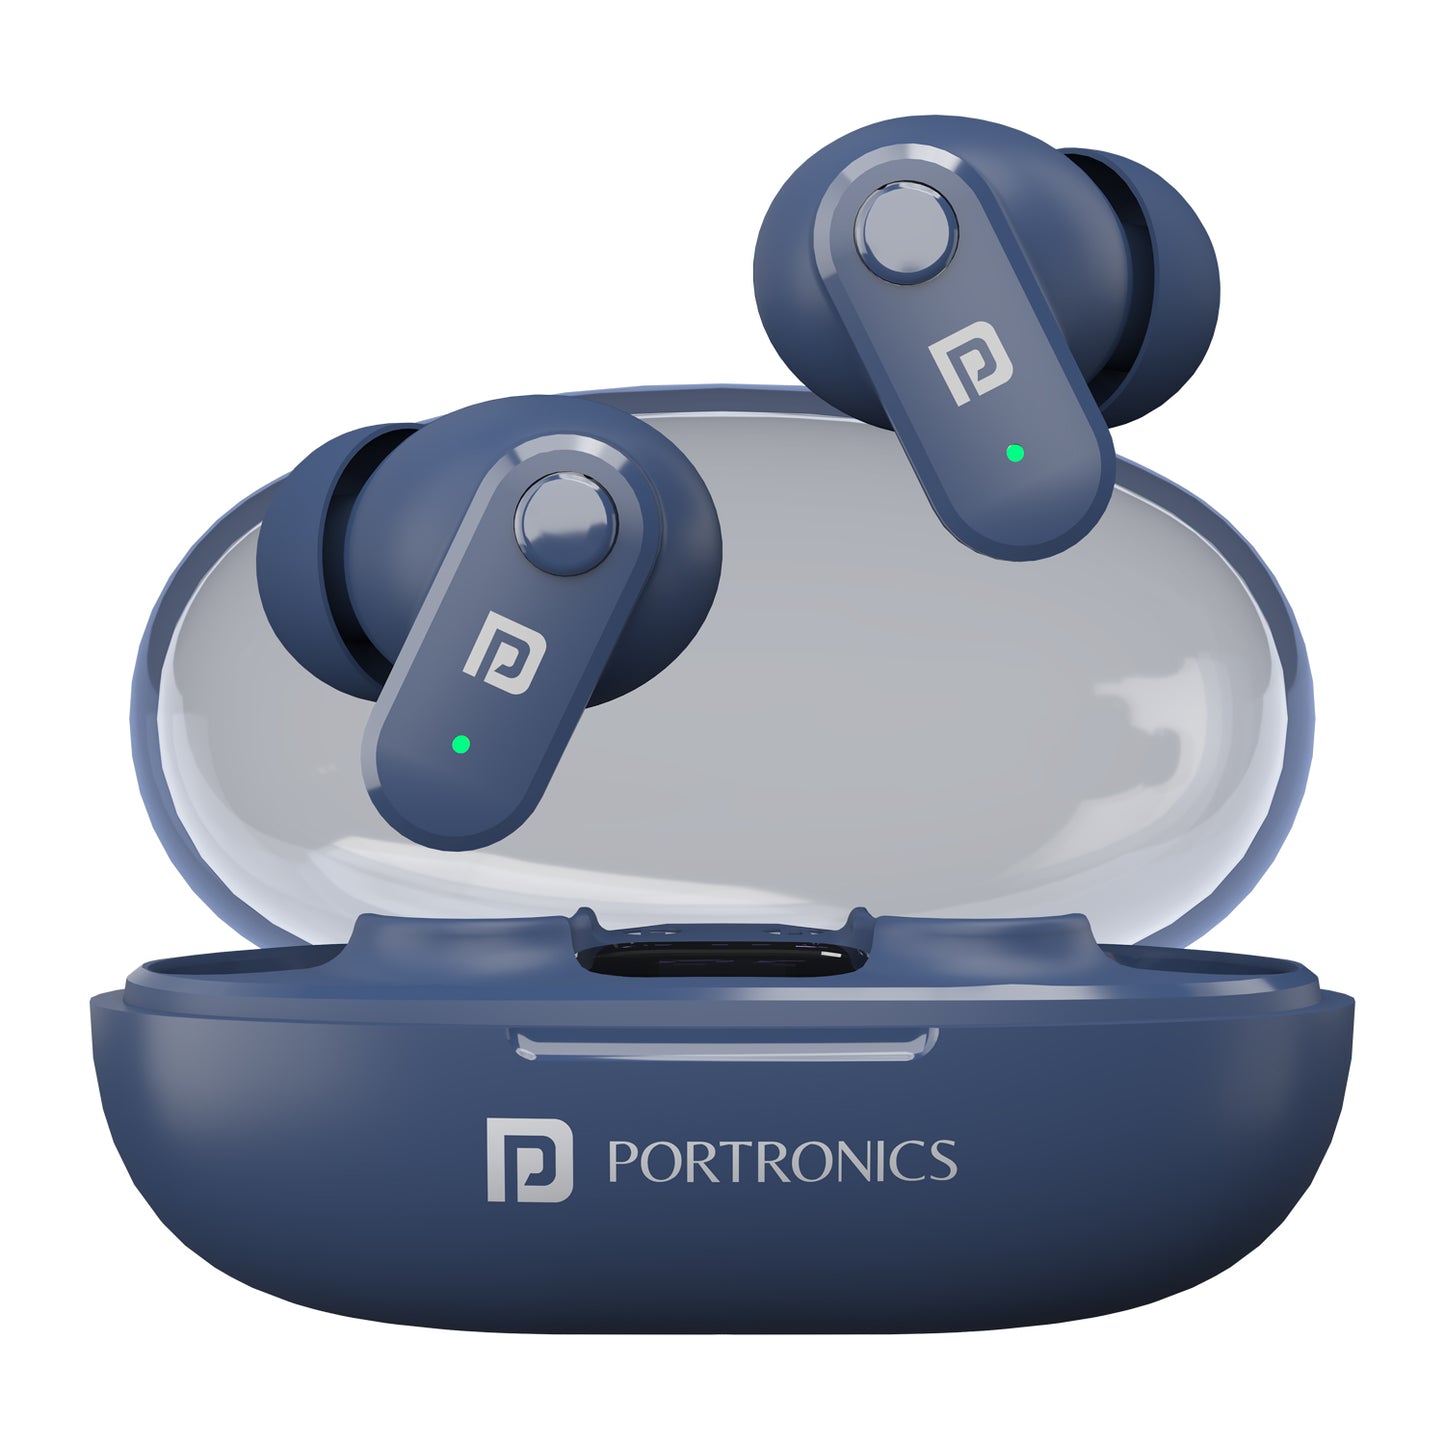 Portronics Harmonics Twins s16 Smart wireless TWS earbuds| earbuds with noise cancelling online| Bluetooth earbuds with mic| best earbuds at affordable price| latest wireless earbuds